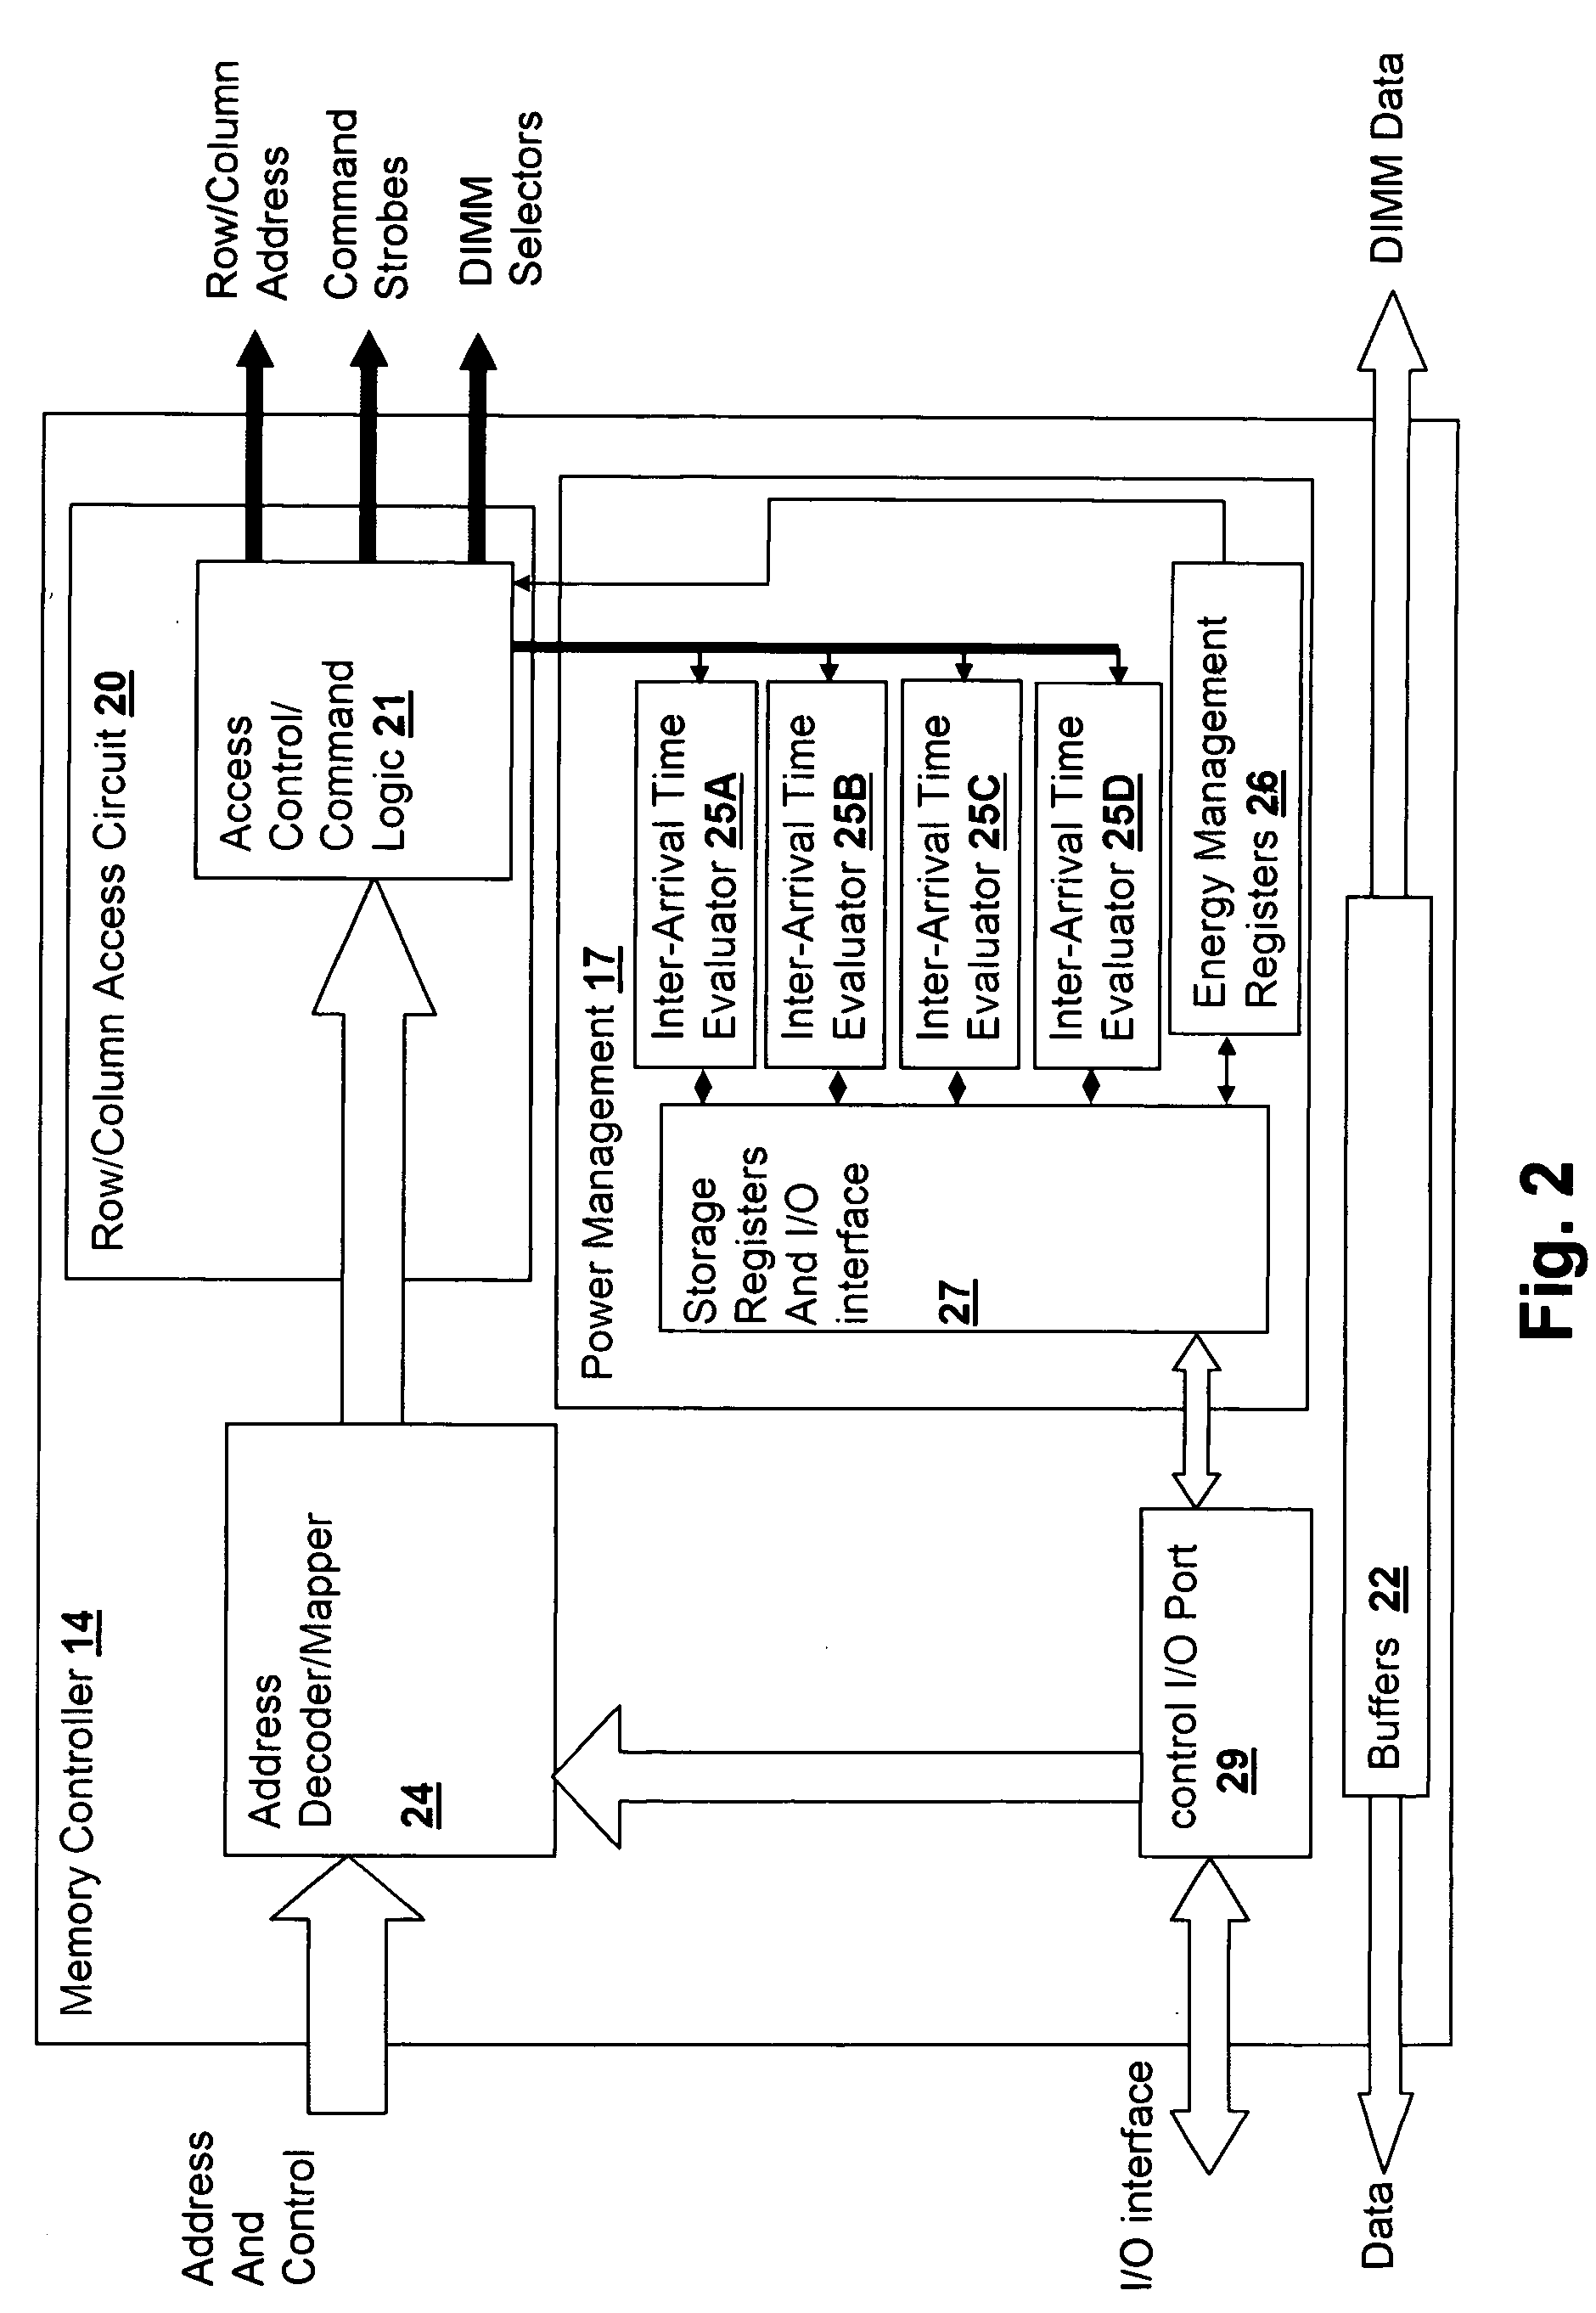 Method and system for power management including device controller-based device use evaluation and power-state control